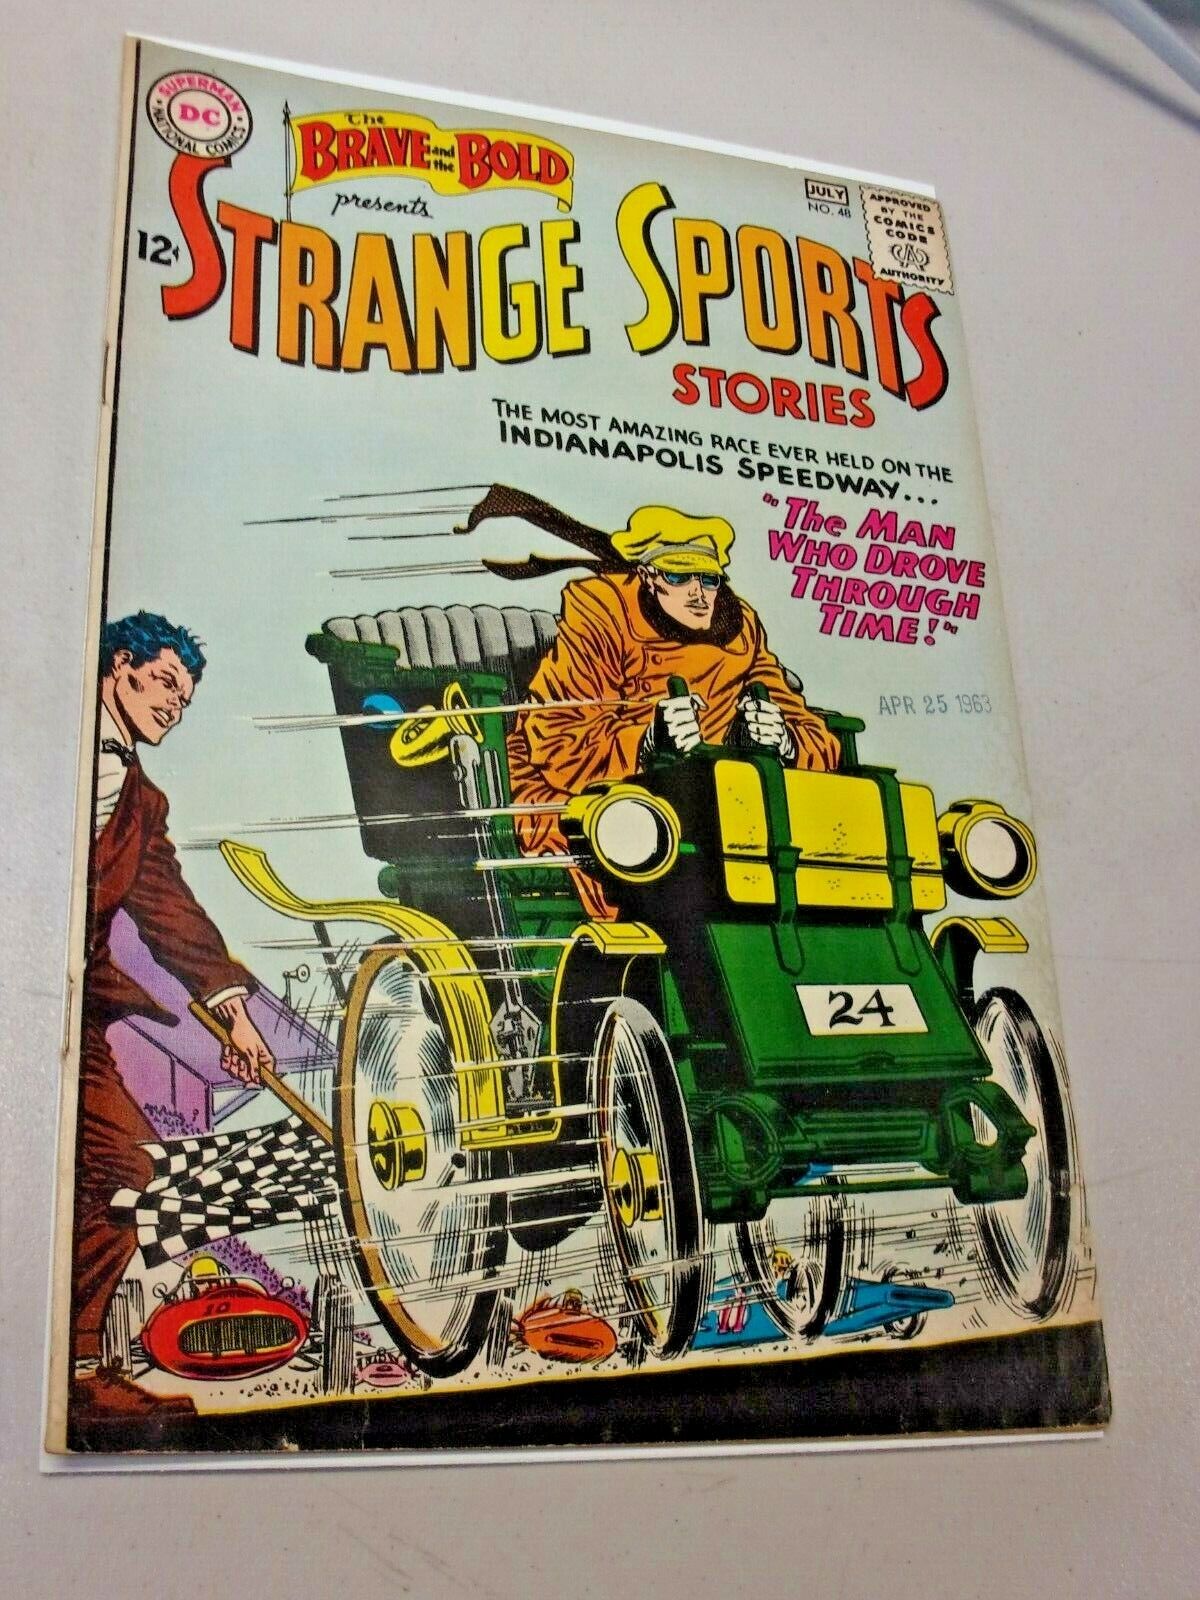 The Brave and the Bold Presents Strange Sports Stories No.48 July 1963 DC Comics